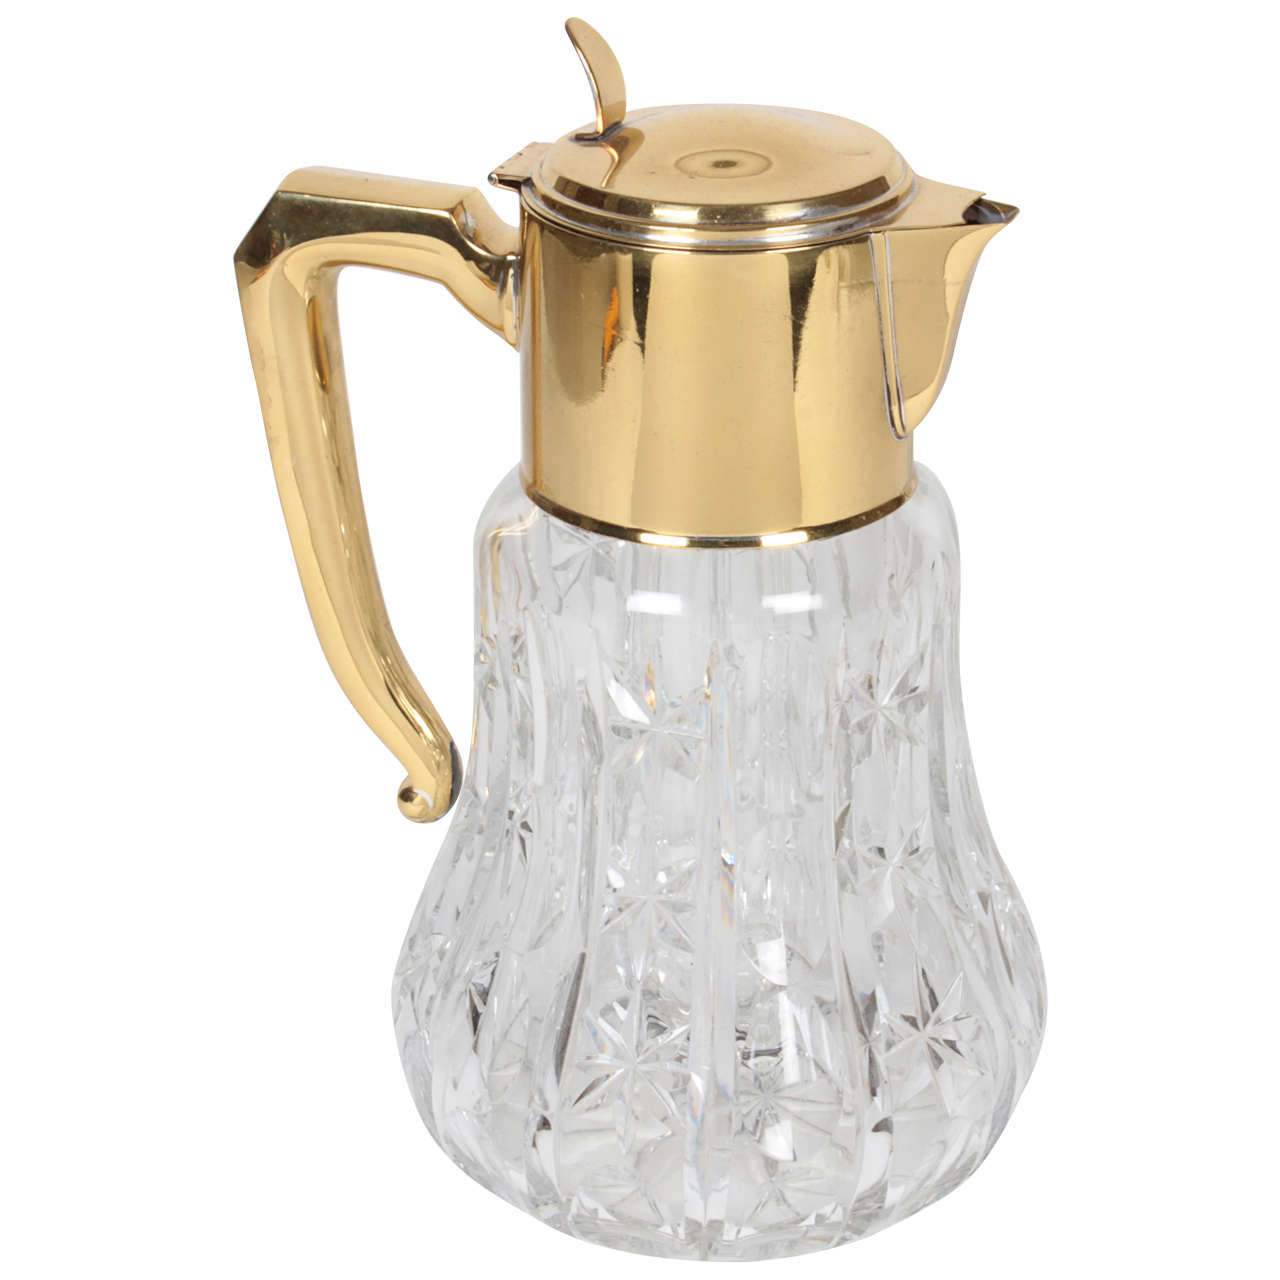 1930s Vintage English Pitcher with Ice Insert